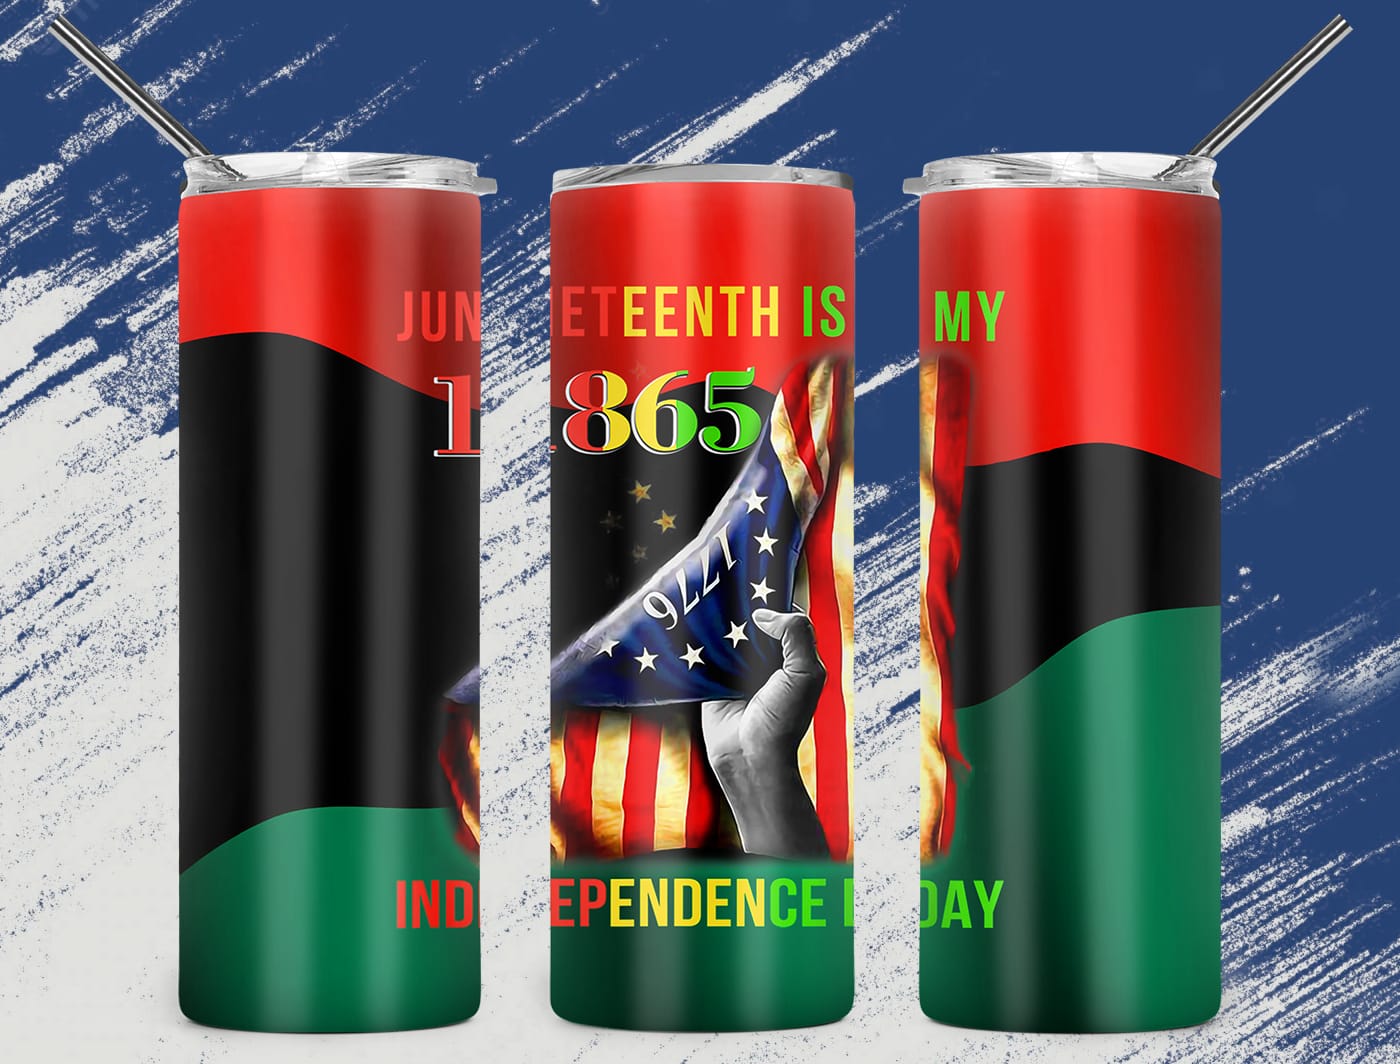 juneteenth is my independence day 1865 skinny tumbler